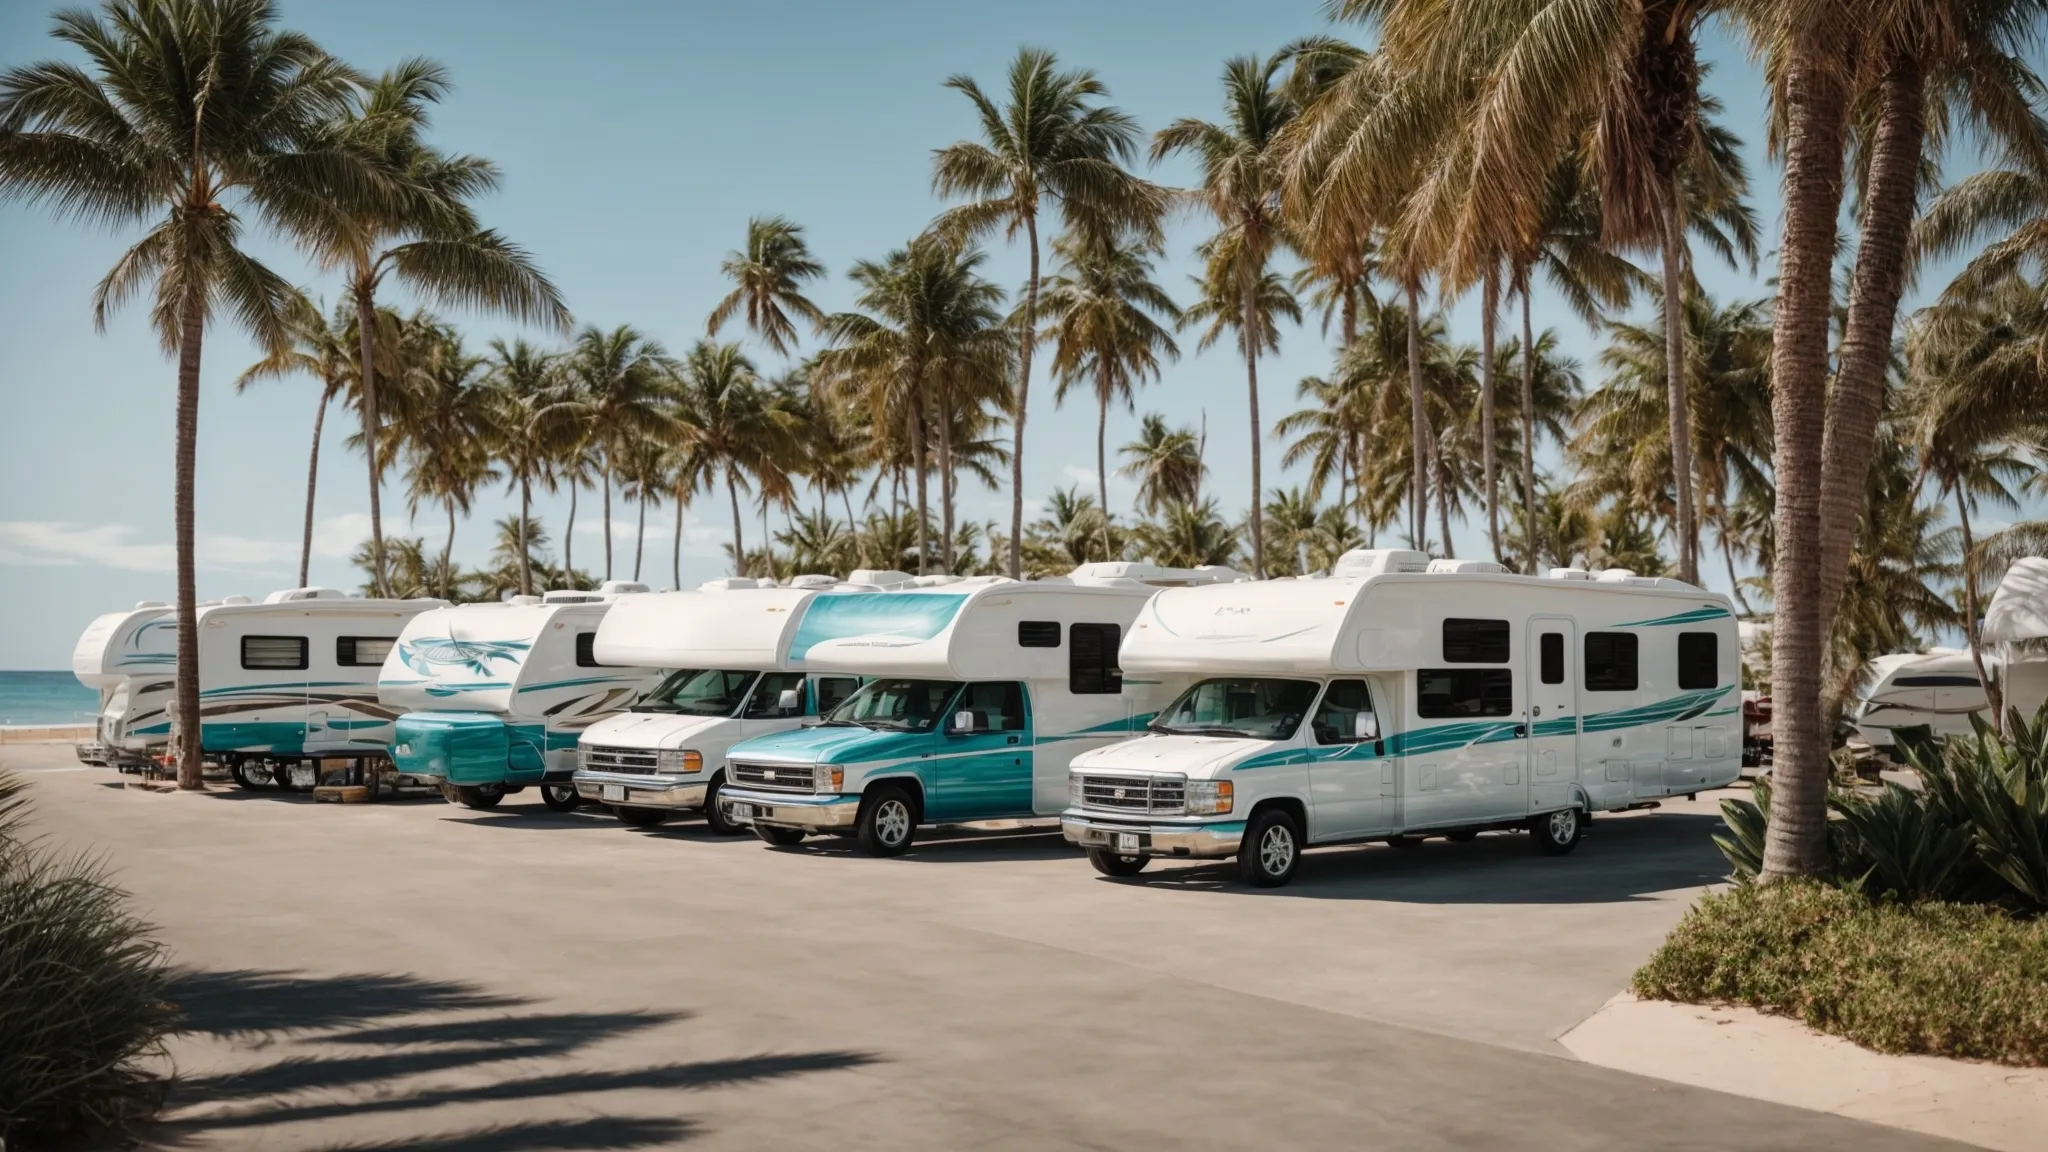 an array of rvs nestled amidst palm trees with a view of the shimmering ocean under a clear blue sky.